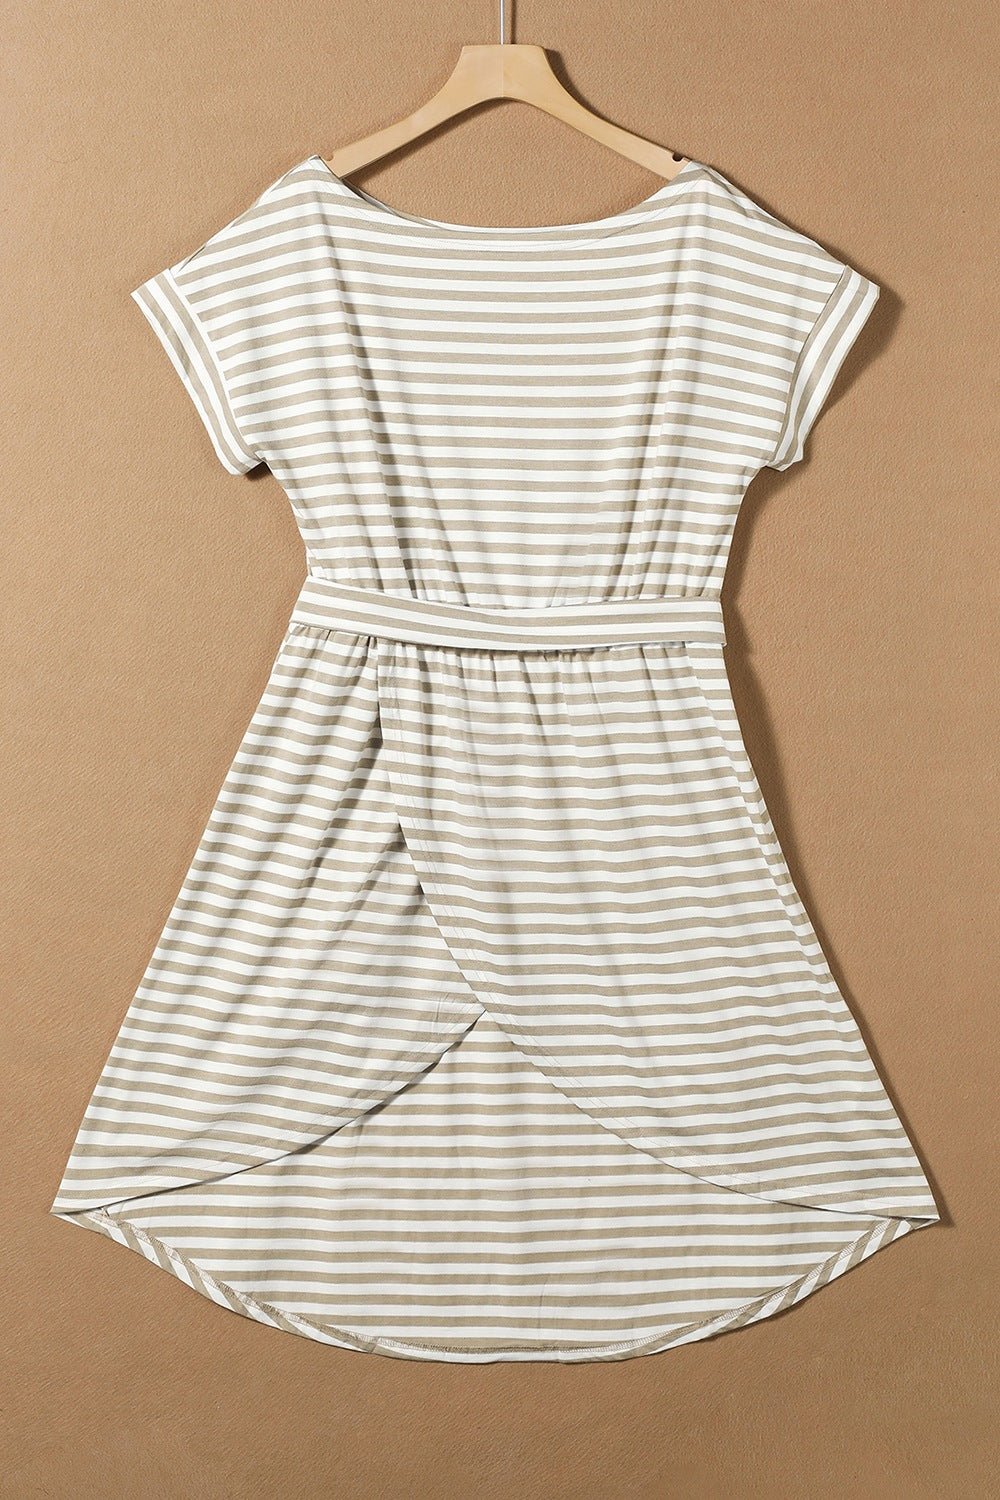 The image is showcasing a Tied Striped Cap Sleeve Mini Dress Casual Summer Beach Short Sundress Cotton Blend at Mommy & Lino's Closet